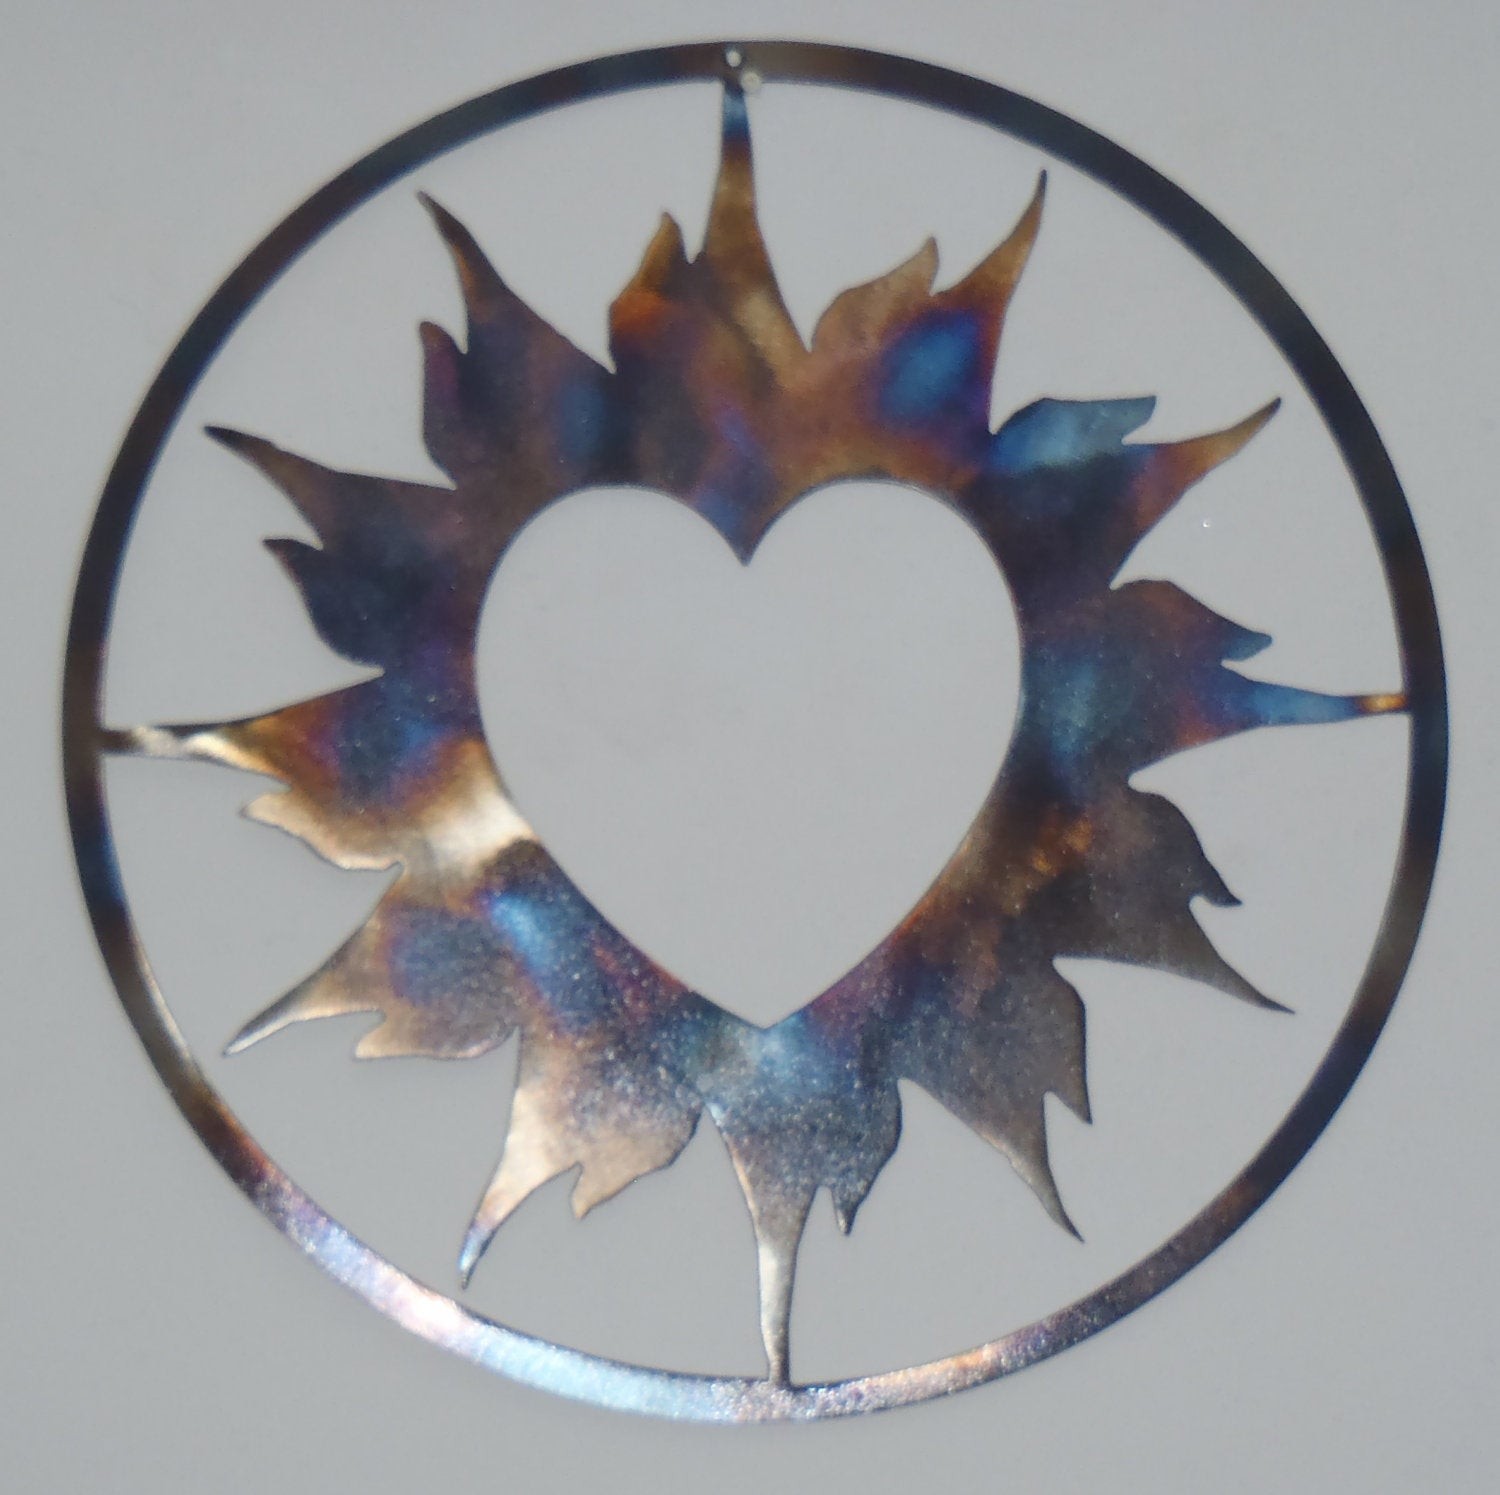 Heart and sun metal art round wall decor by tibi291